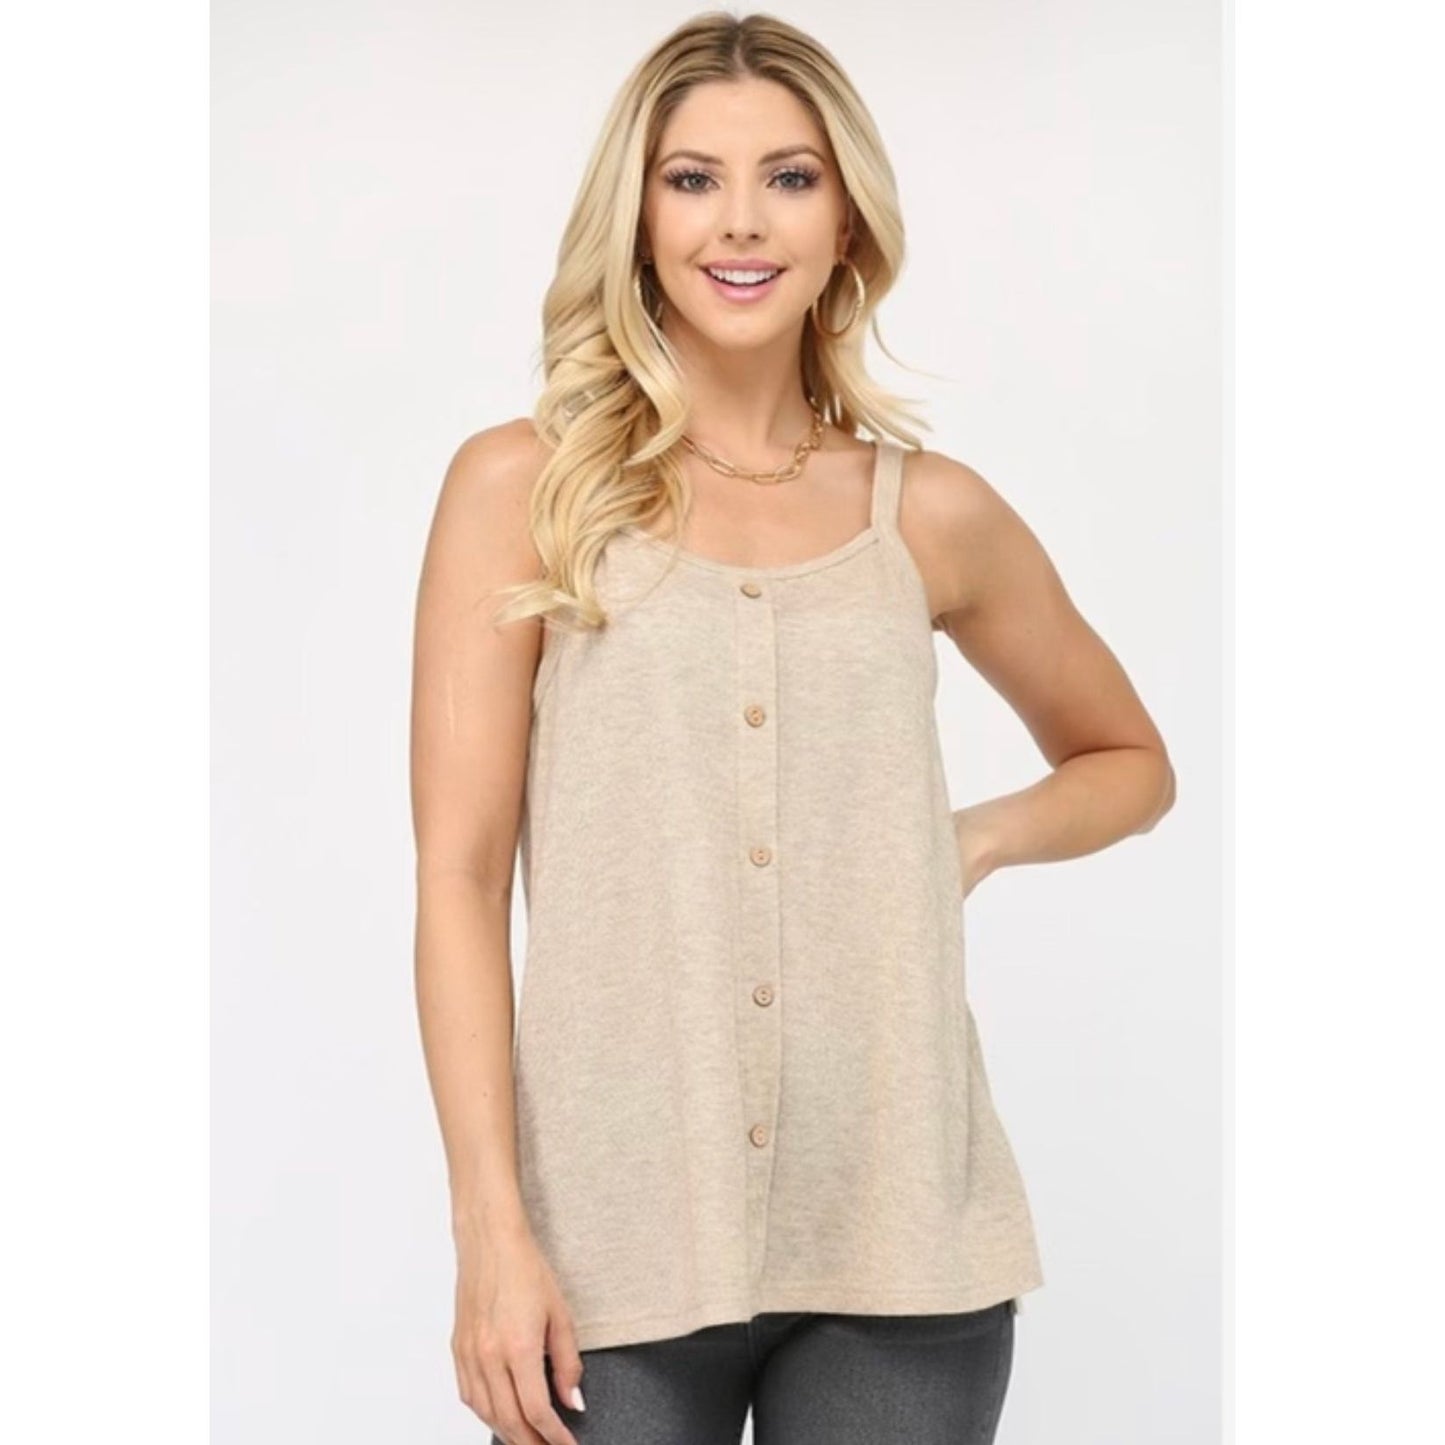 Solid knit tank top by Gigio available in Mocha and Oatmeal 58% Polyester, 29% Rayon, 13% Nylon